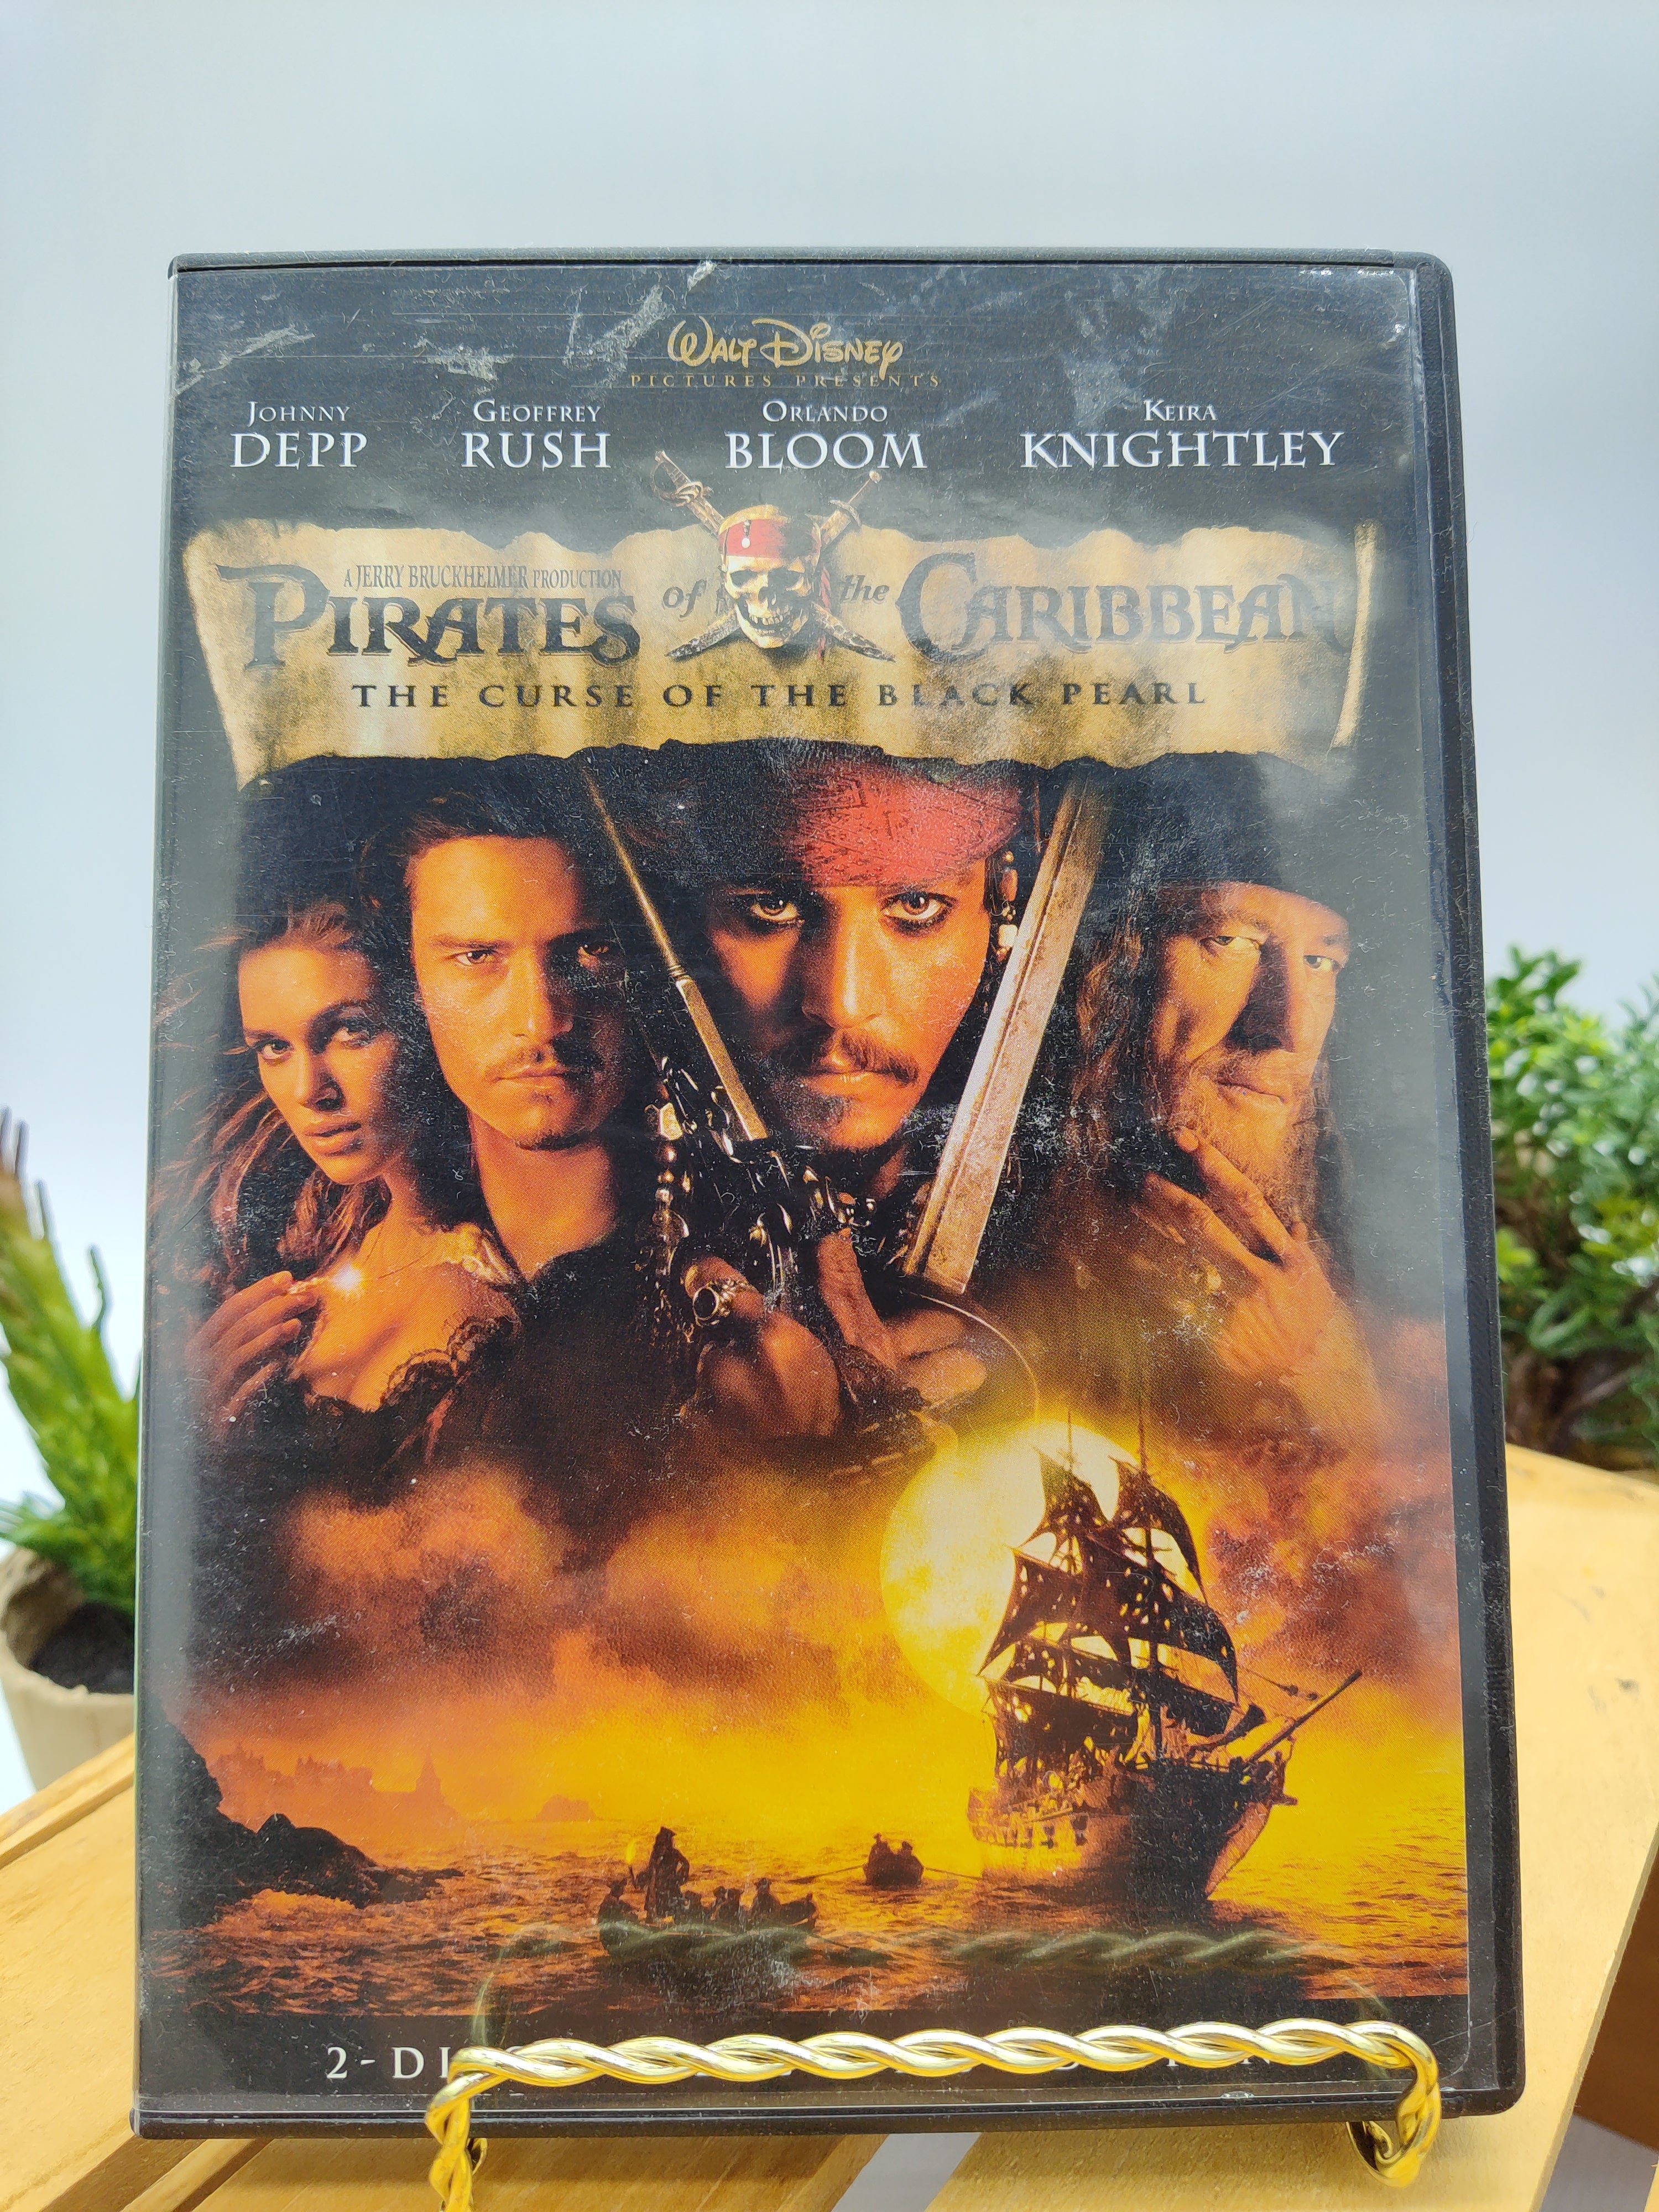 Pirates Of The Caribbean: The Curse Of The Black Pearl DVD